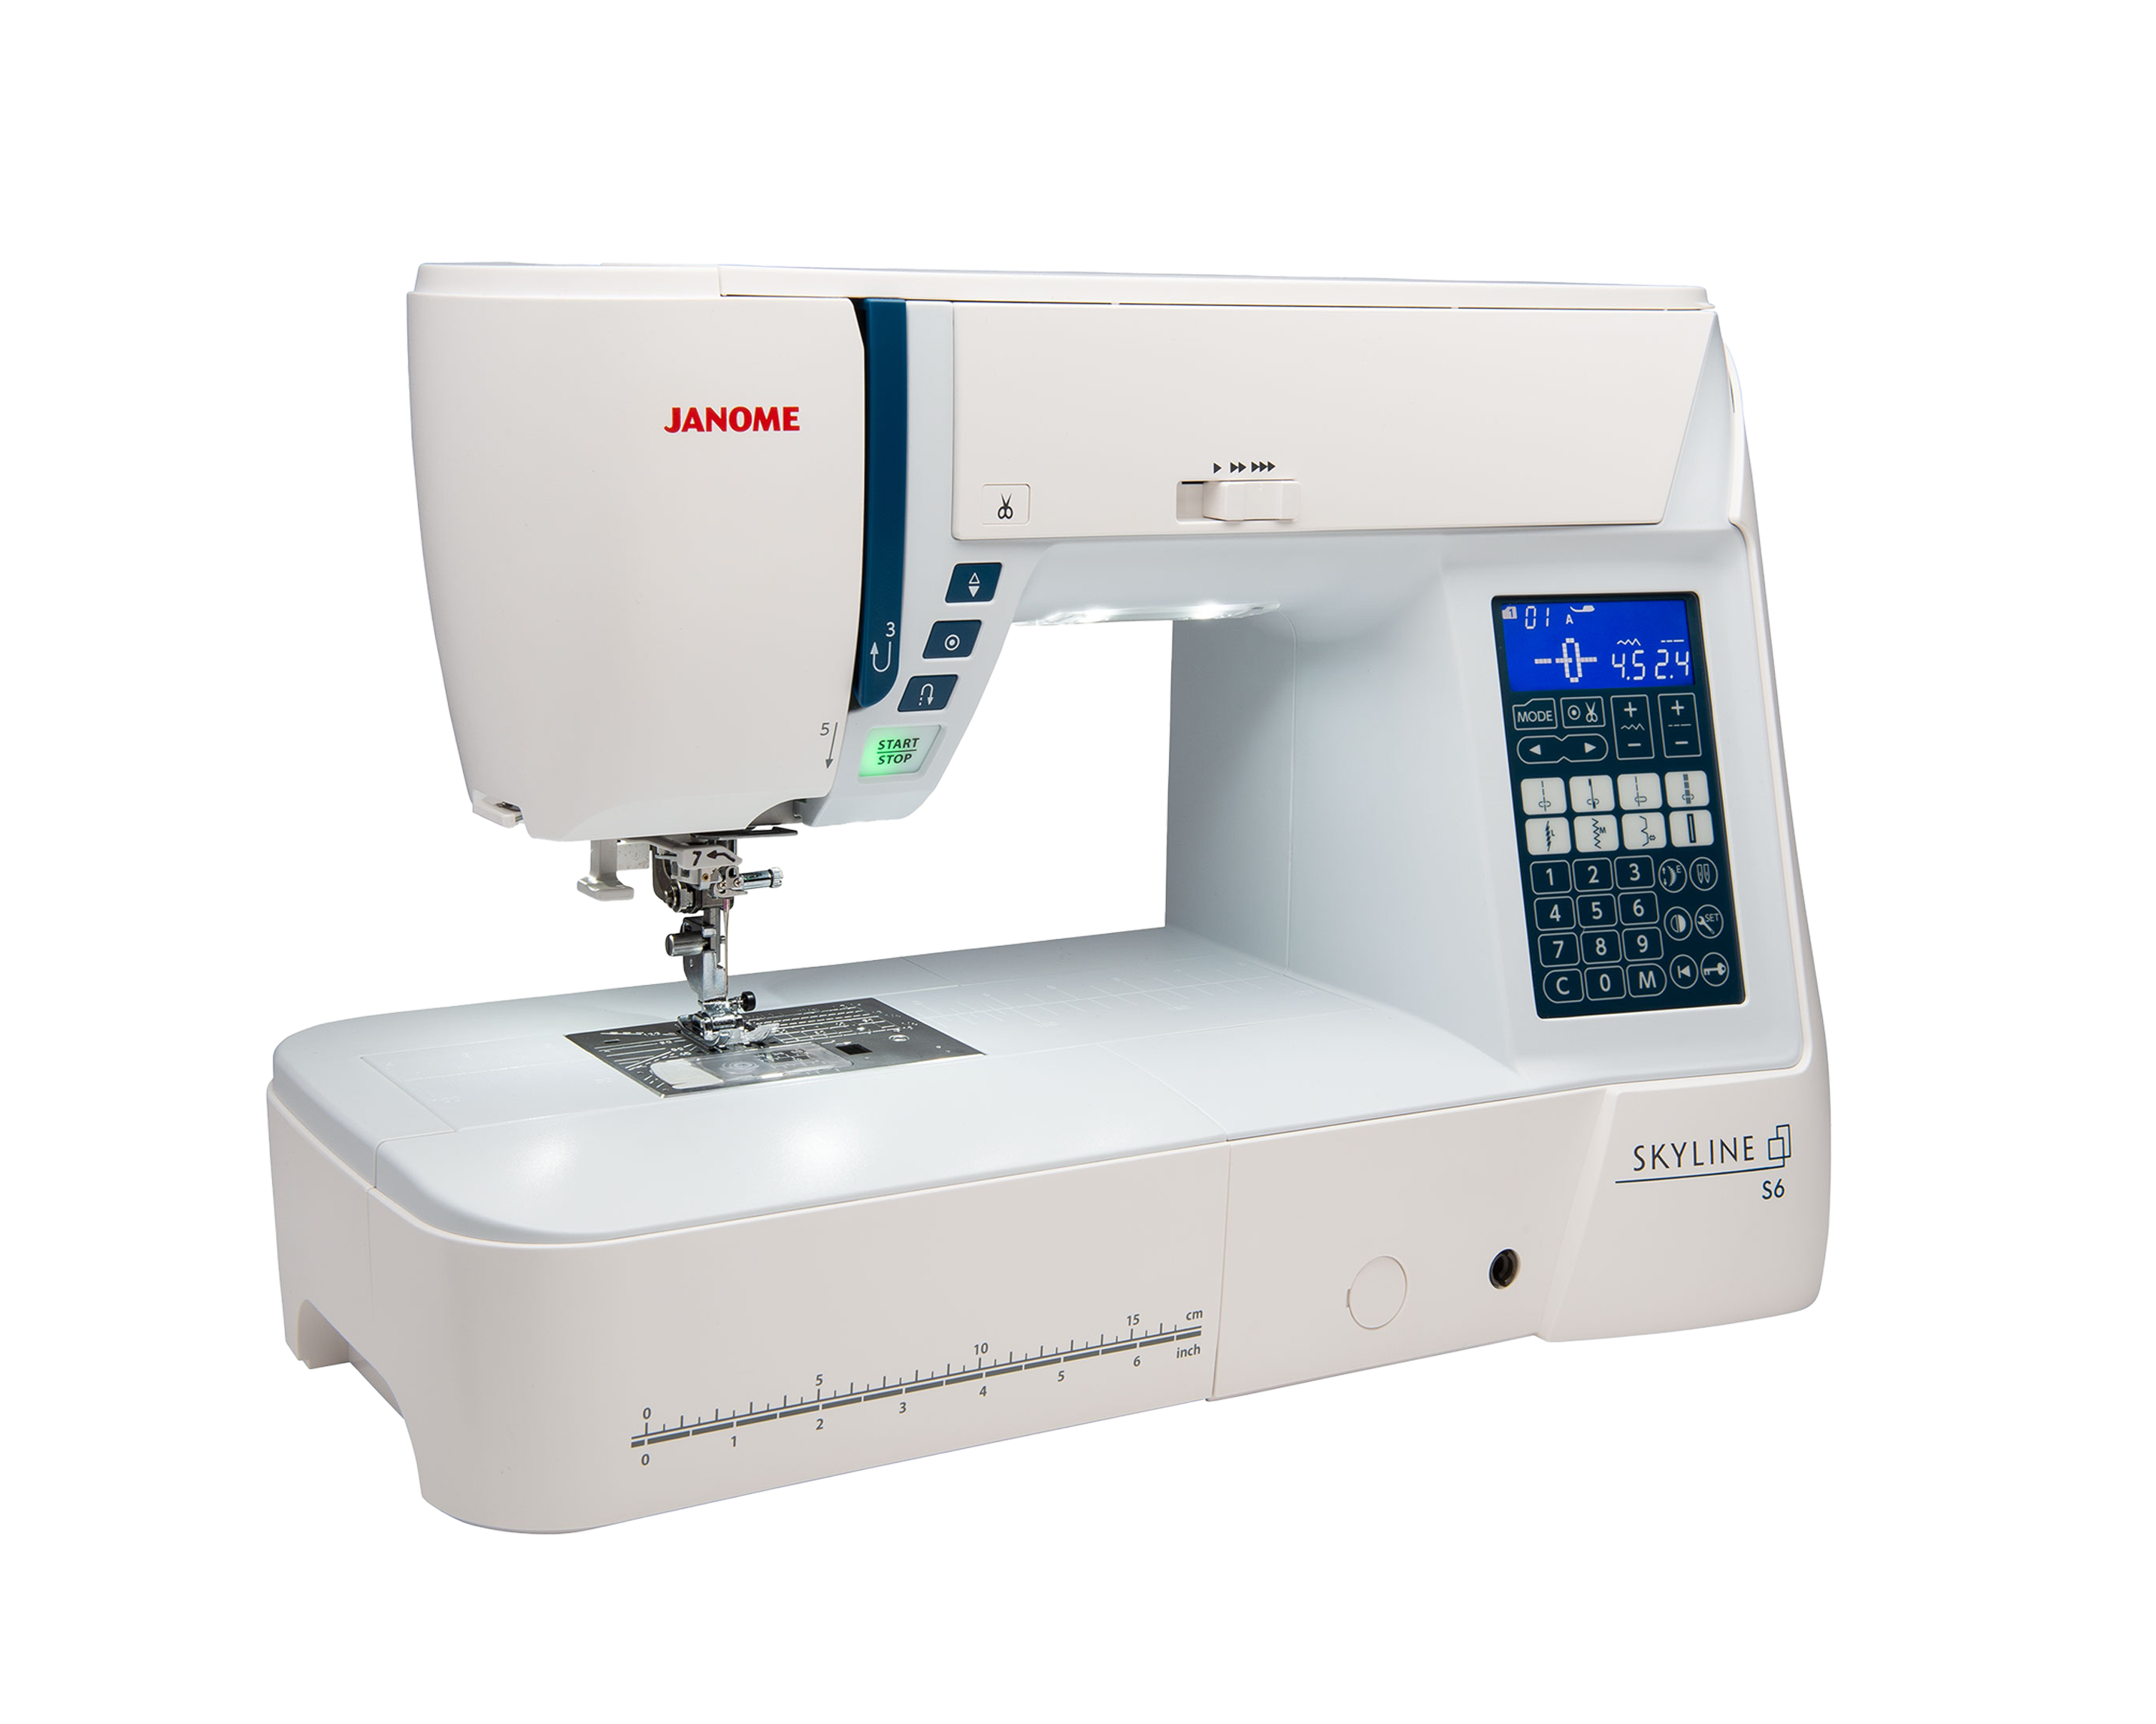 Janome Skyline S6 Sewing and Quilting Machine